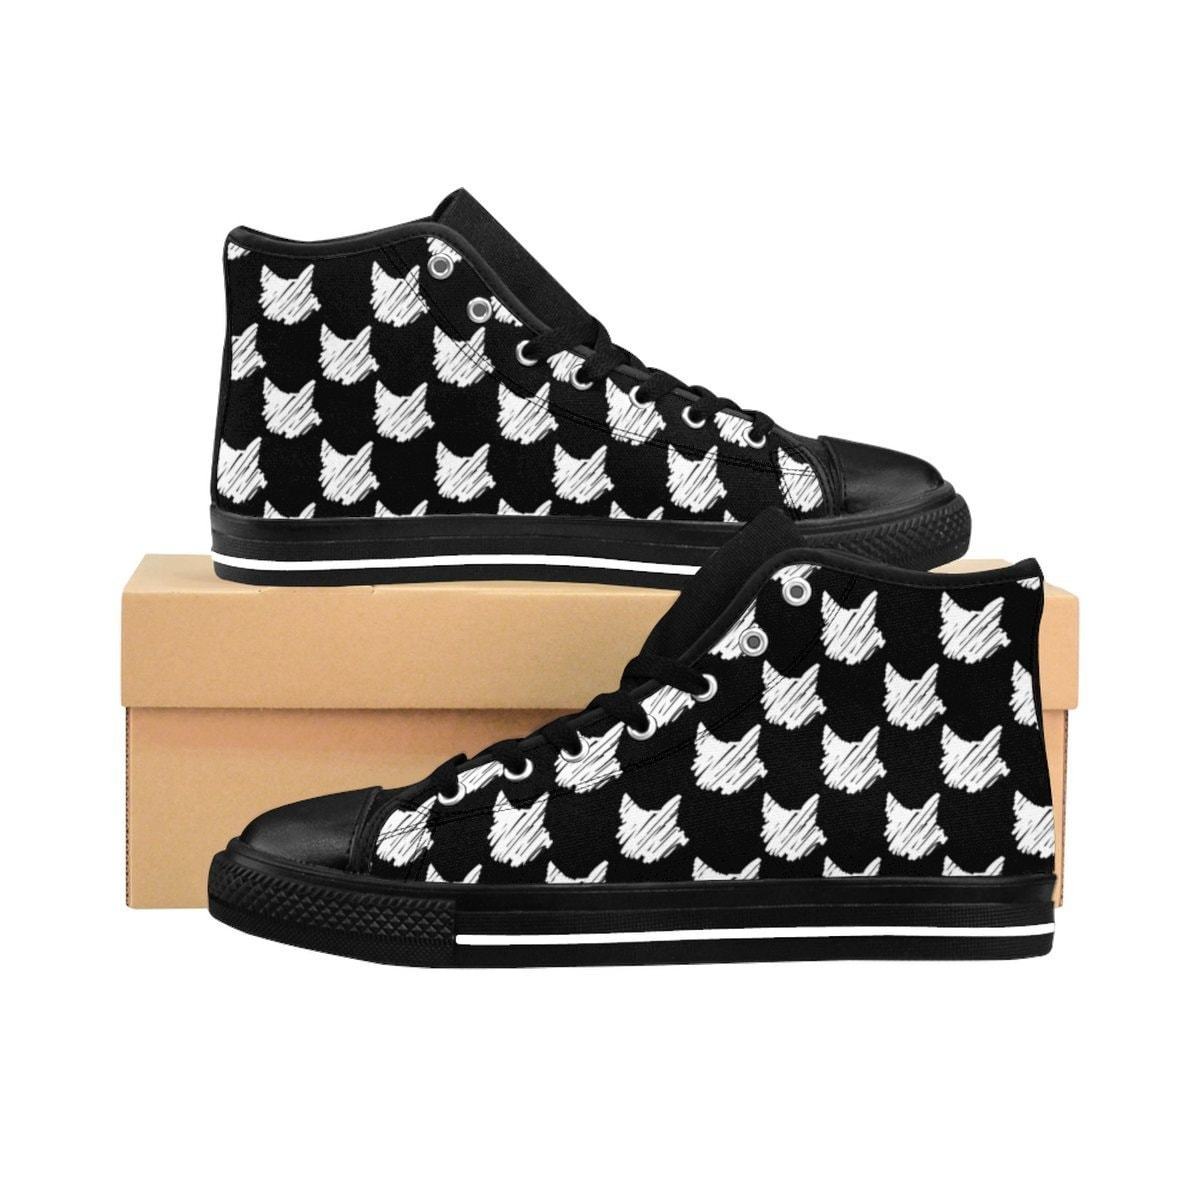 Shoes with Cats On Them, Cat Sneakers with a Unique White Cat Print On a Black Canvas Fabric